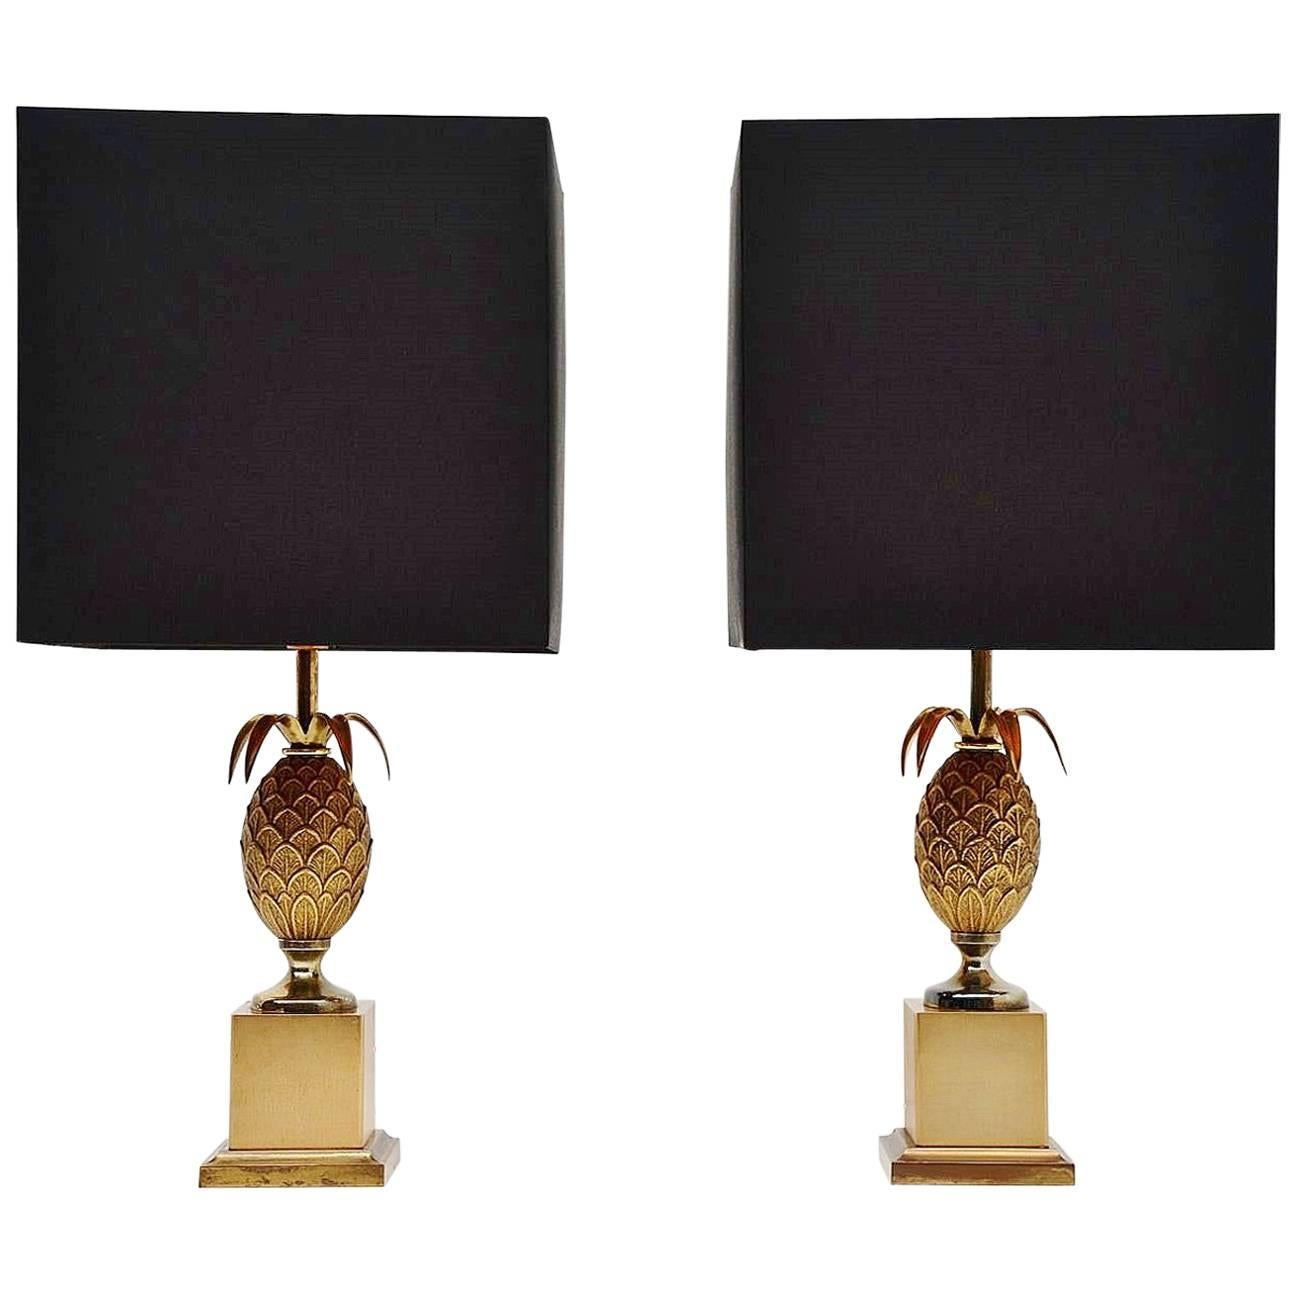 Pair of Maison Le Dauphin Pineapple Table Lamps, France, 1970